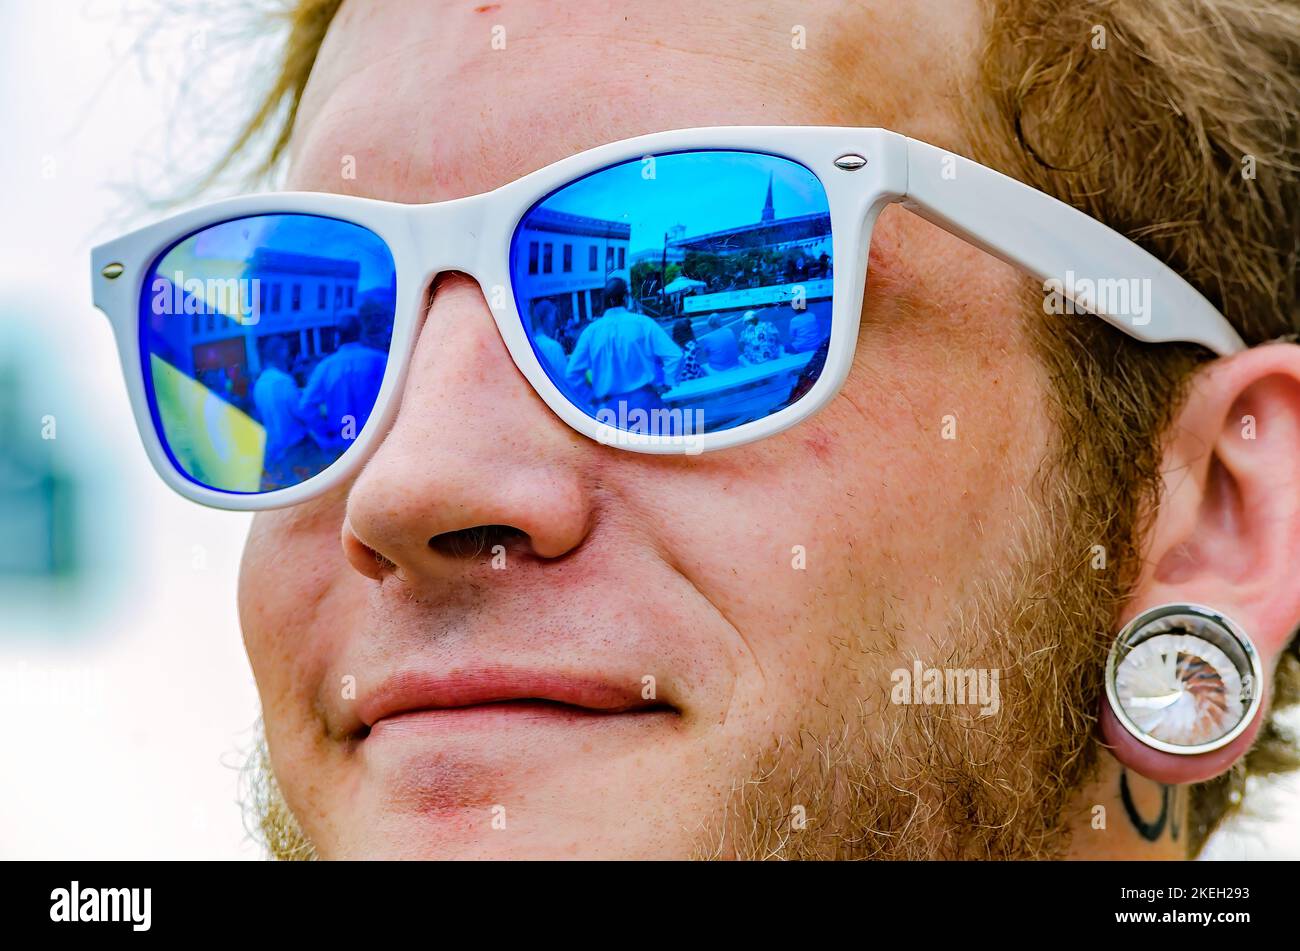 A man wears sunglasses and a plug earring during the Market Street Festival, May 5, 2012, in Columbus, Mississippi. Stock Photo